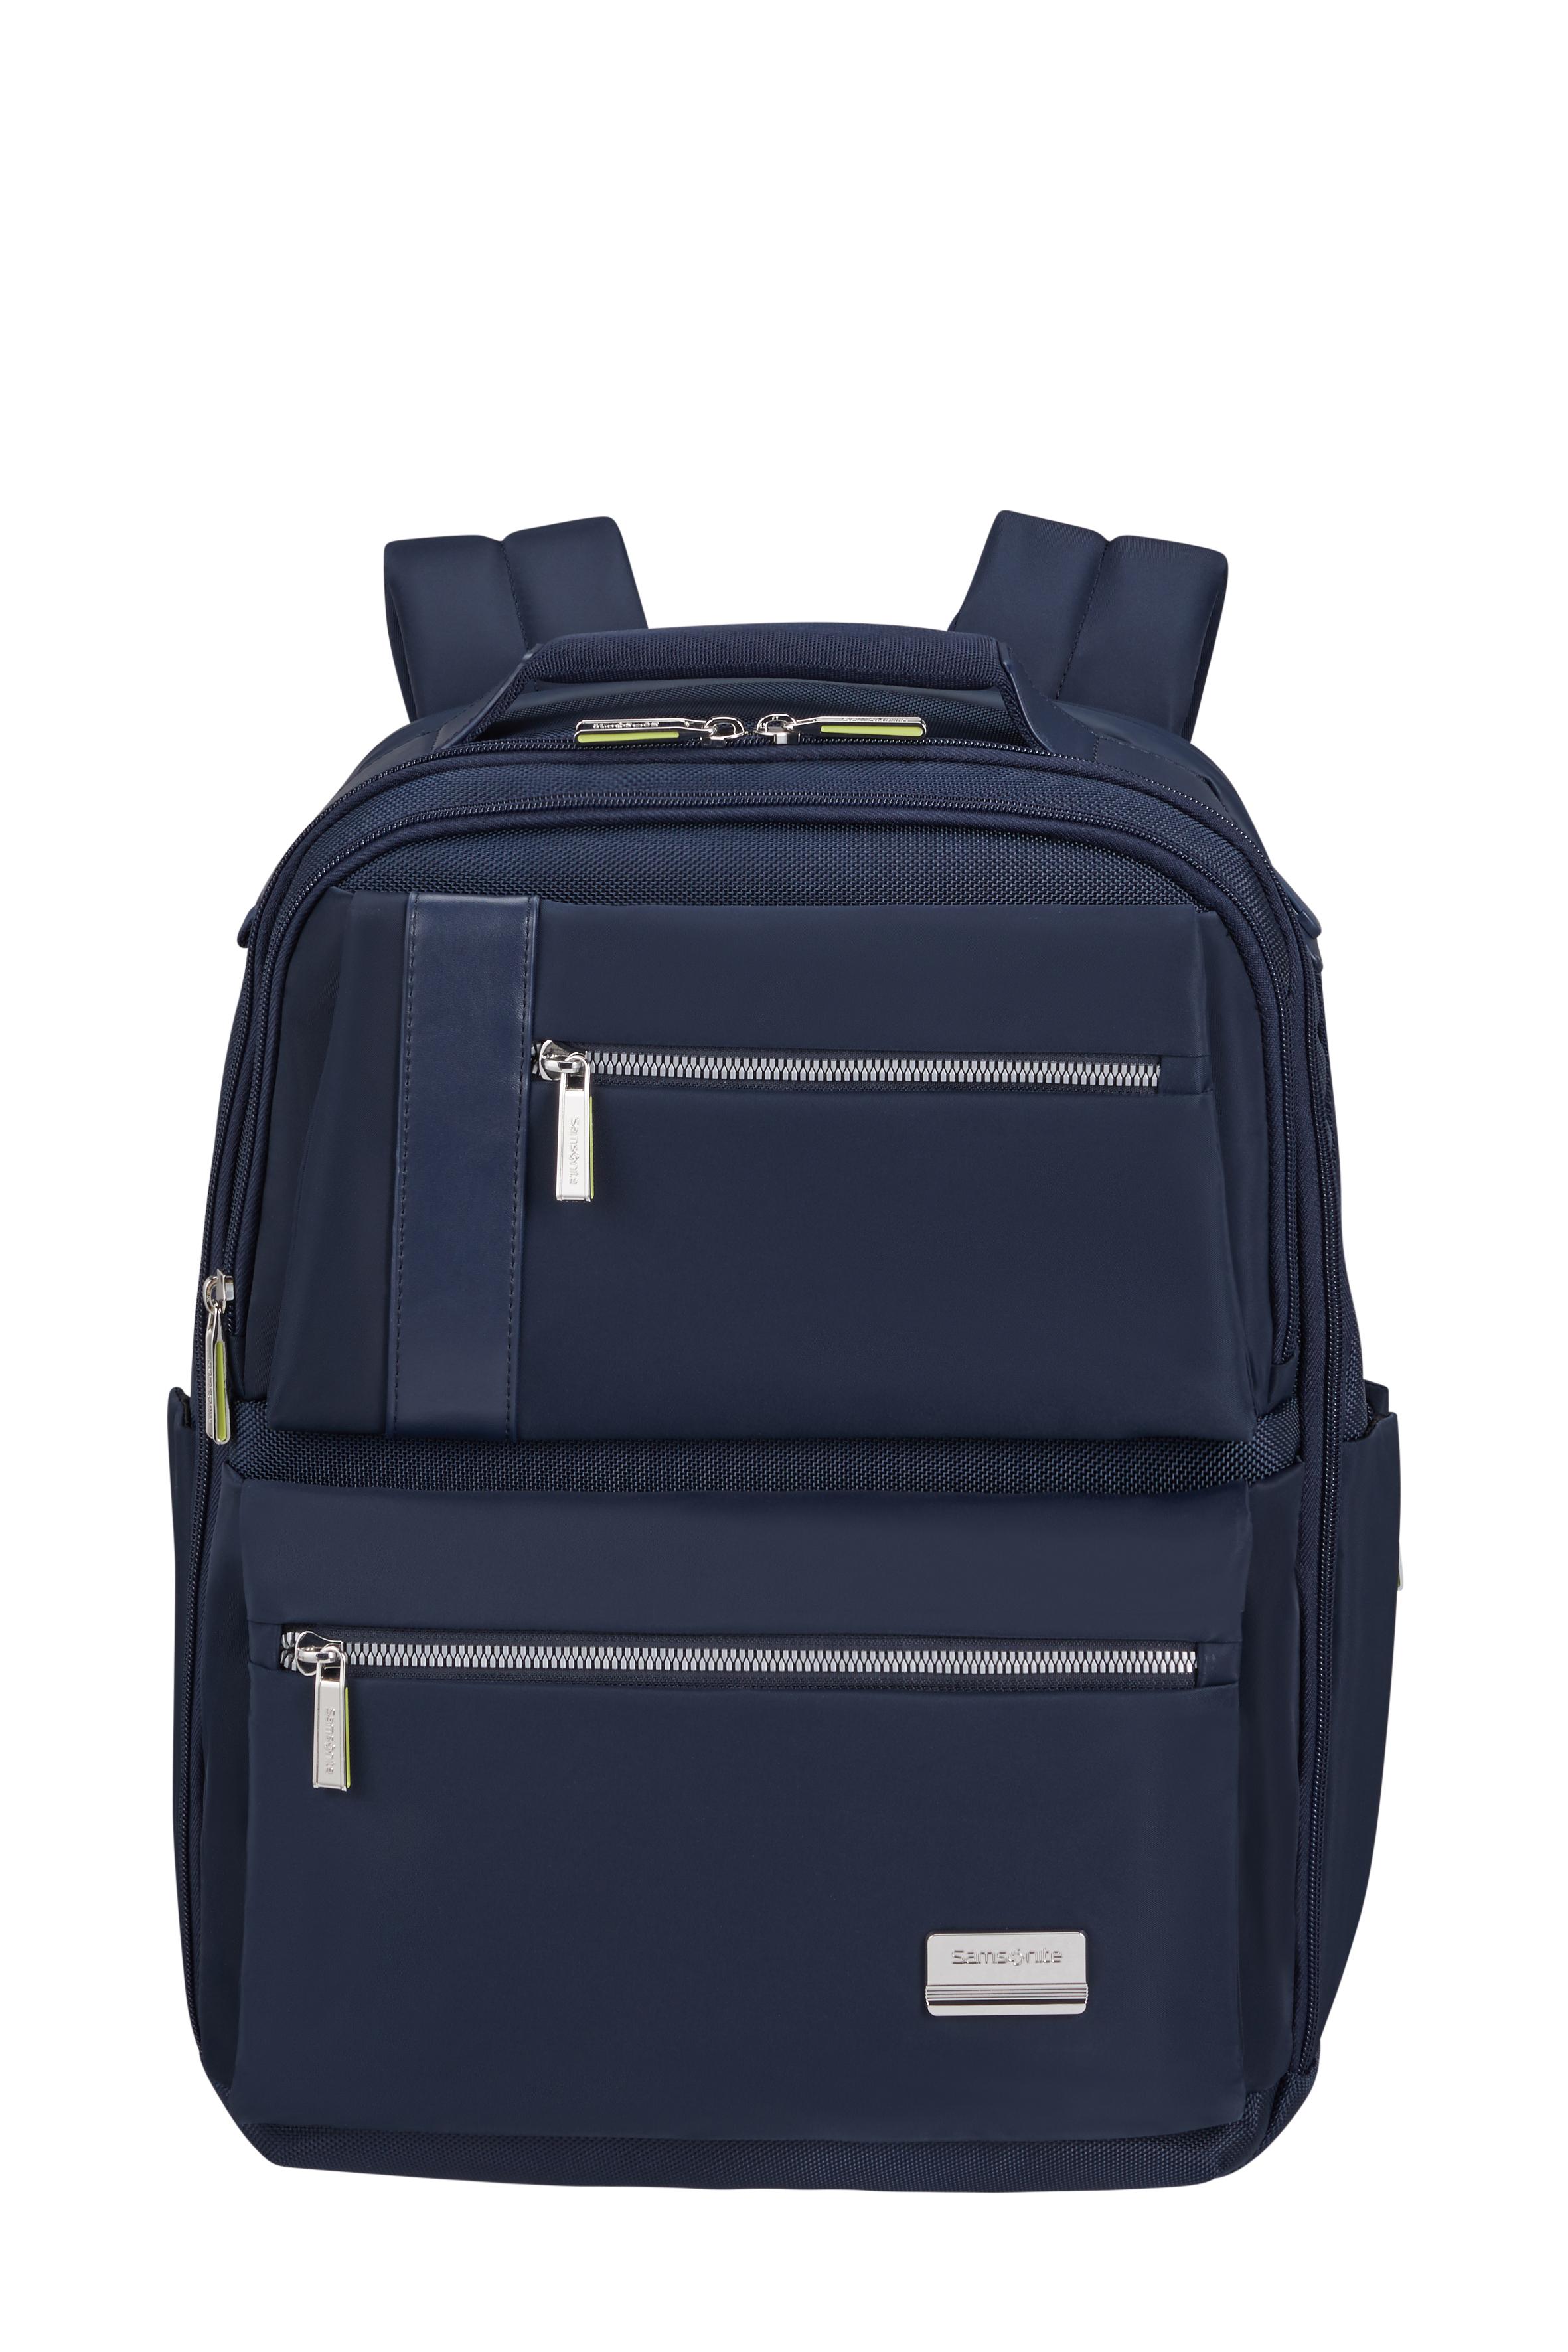 OPENROAD CHIC 2.0 BACKPACK 14.1